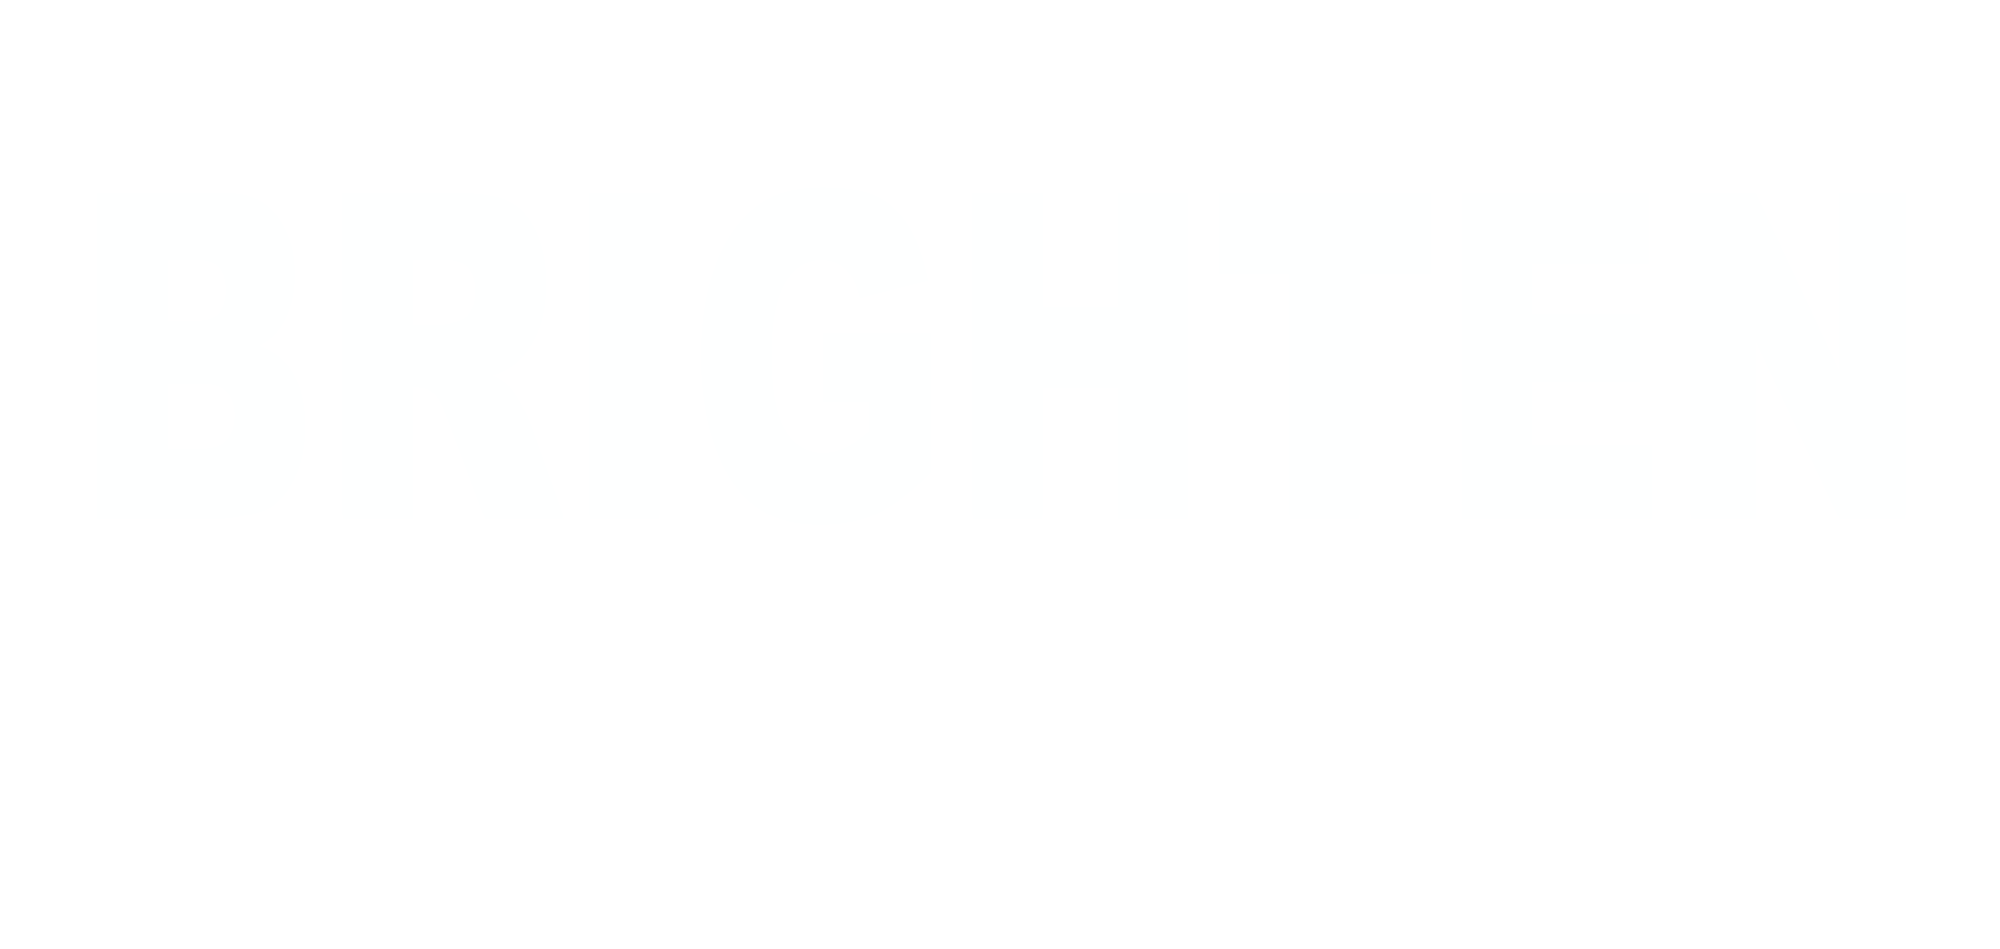 https://charitywindowcleaning.com/wp-content/uploads/2019/01/Window-Cleaning-Brighten-your-view-white.png